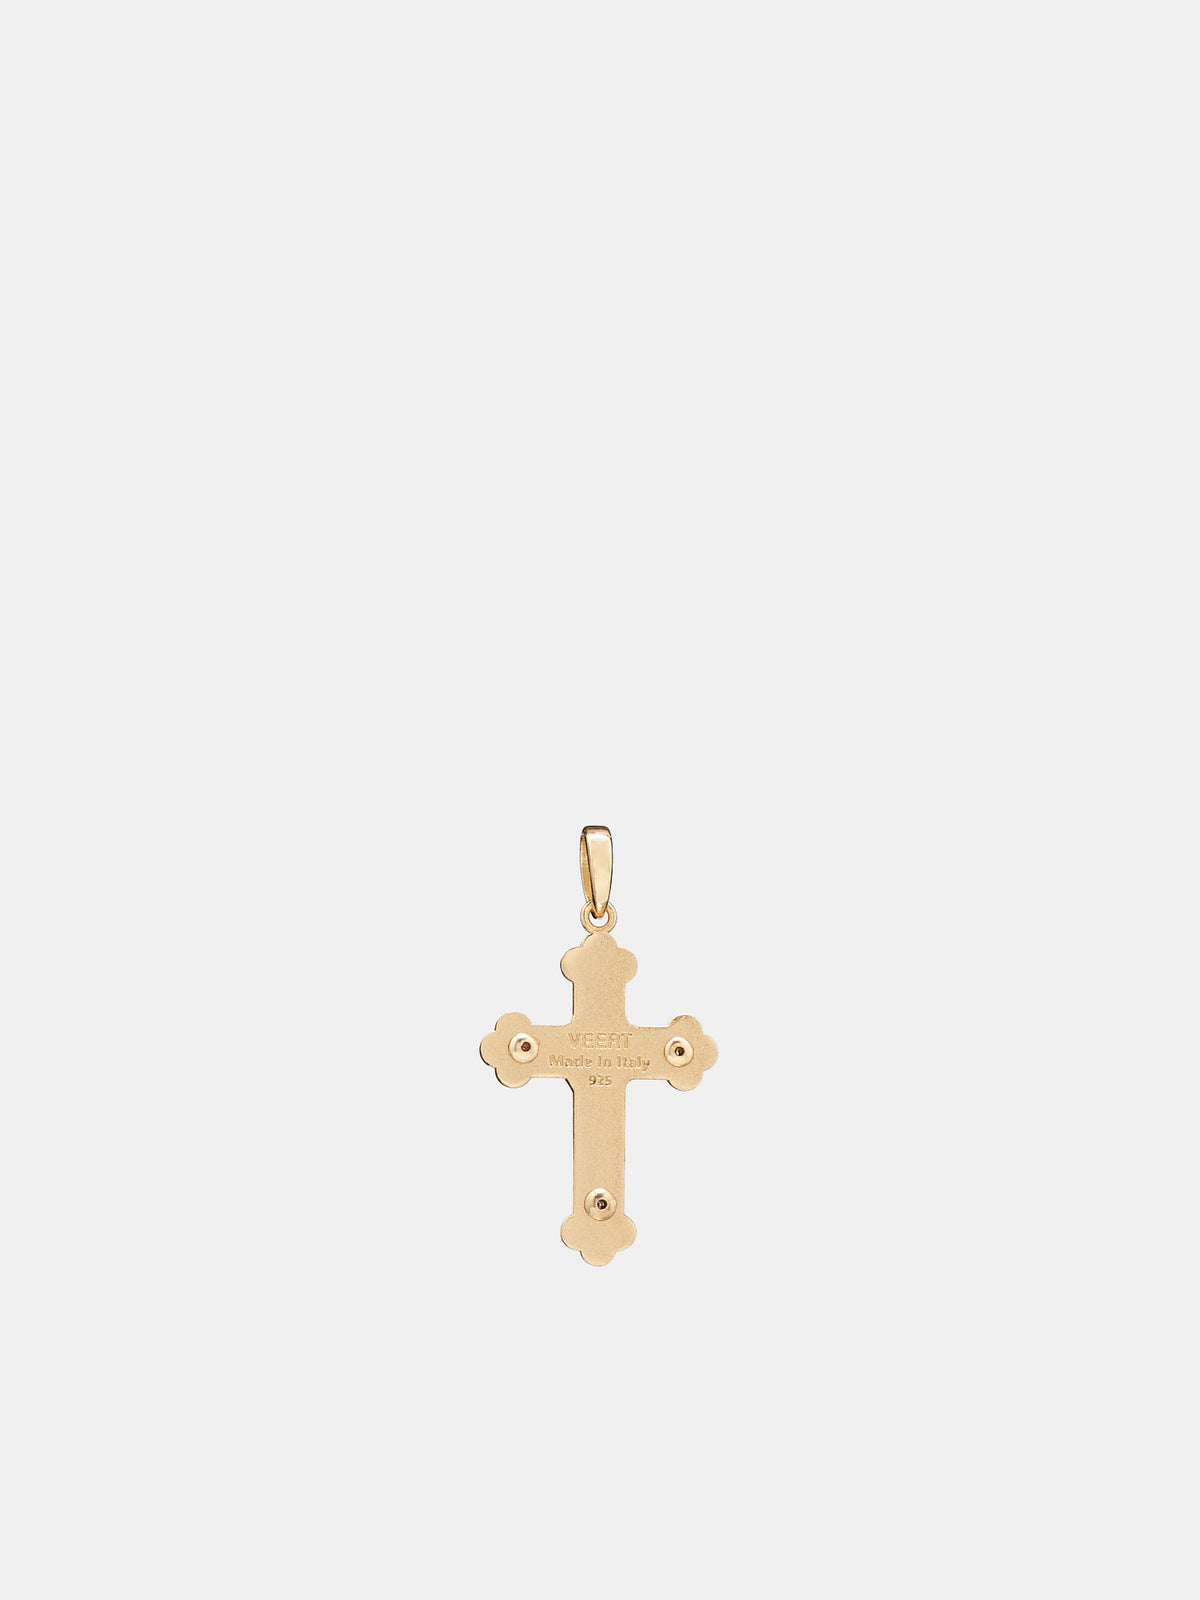 The Small Jesus Piece (CRVEPLS-YELLOW-GOLD)